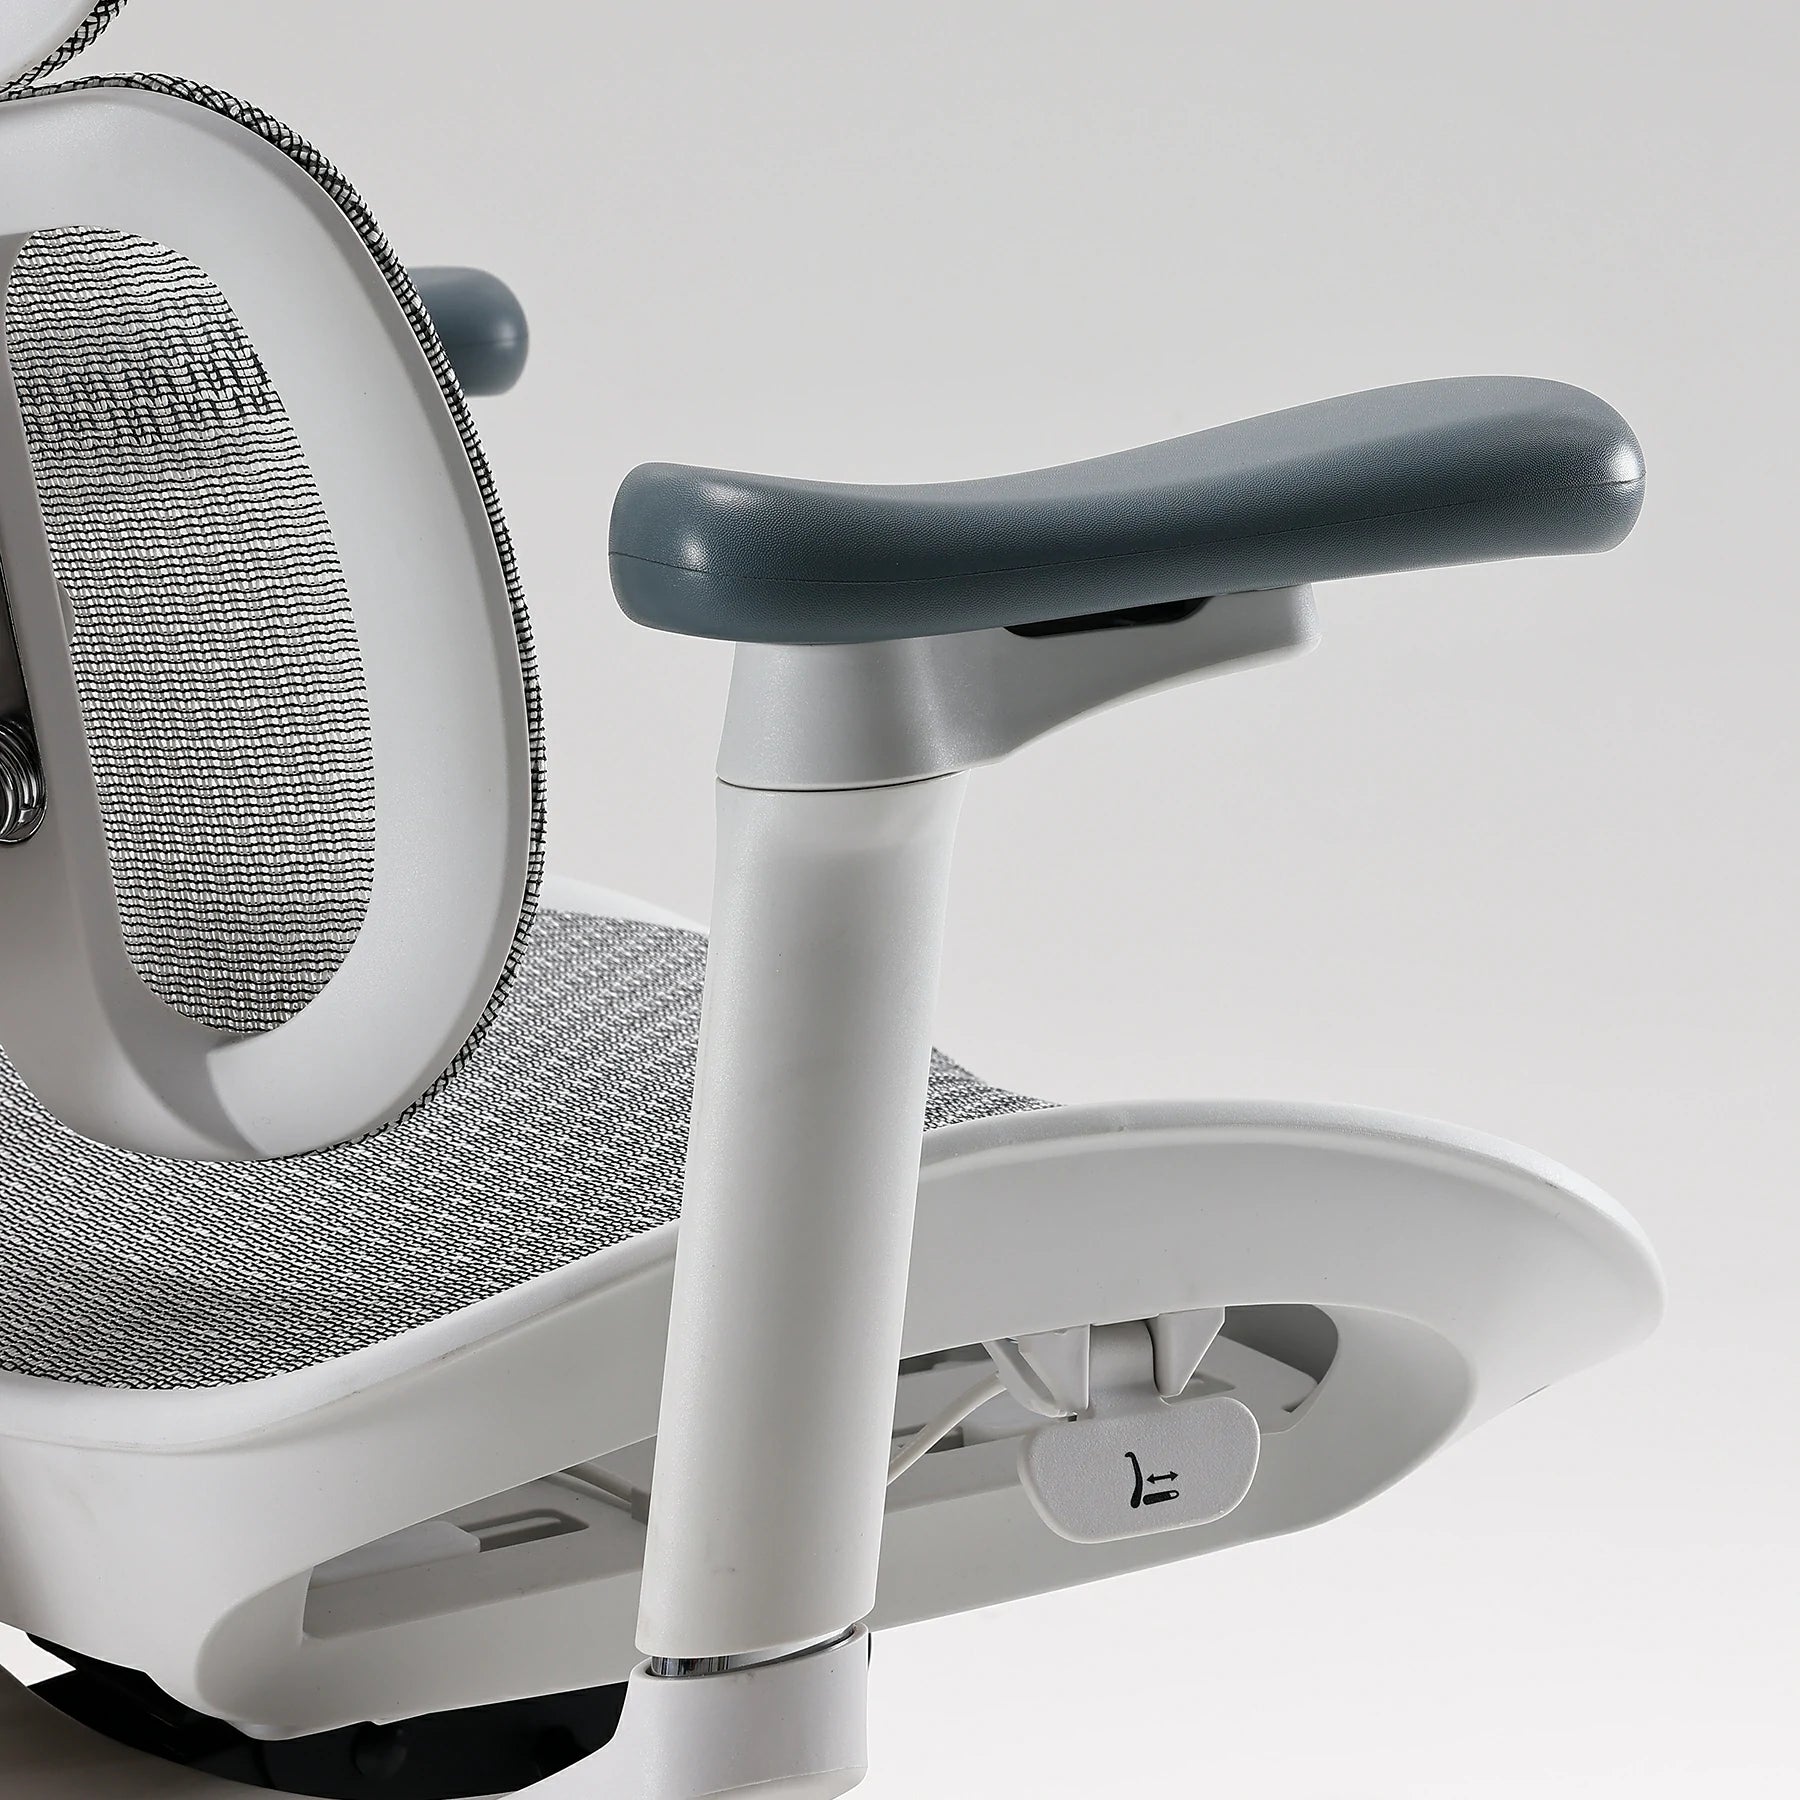 Sihoo Doro S100 Ergonomic Office Chair with Dual Dynamic Lumbar Support